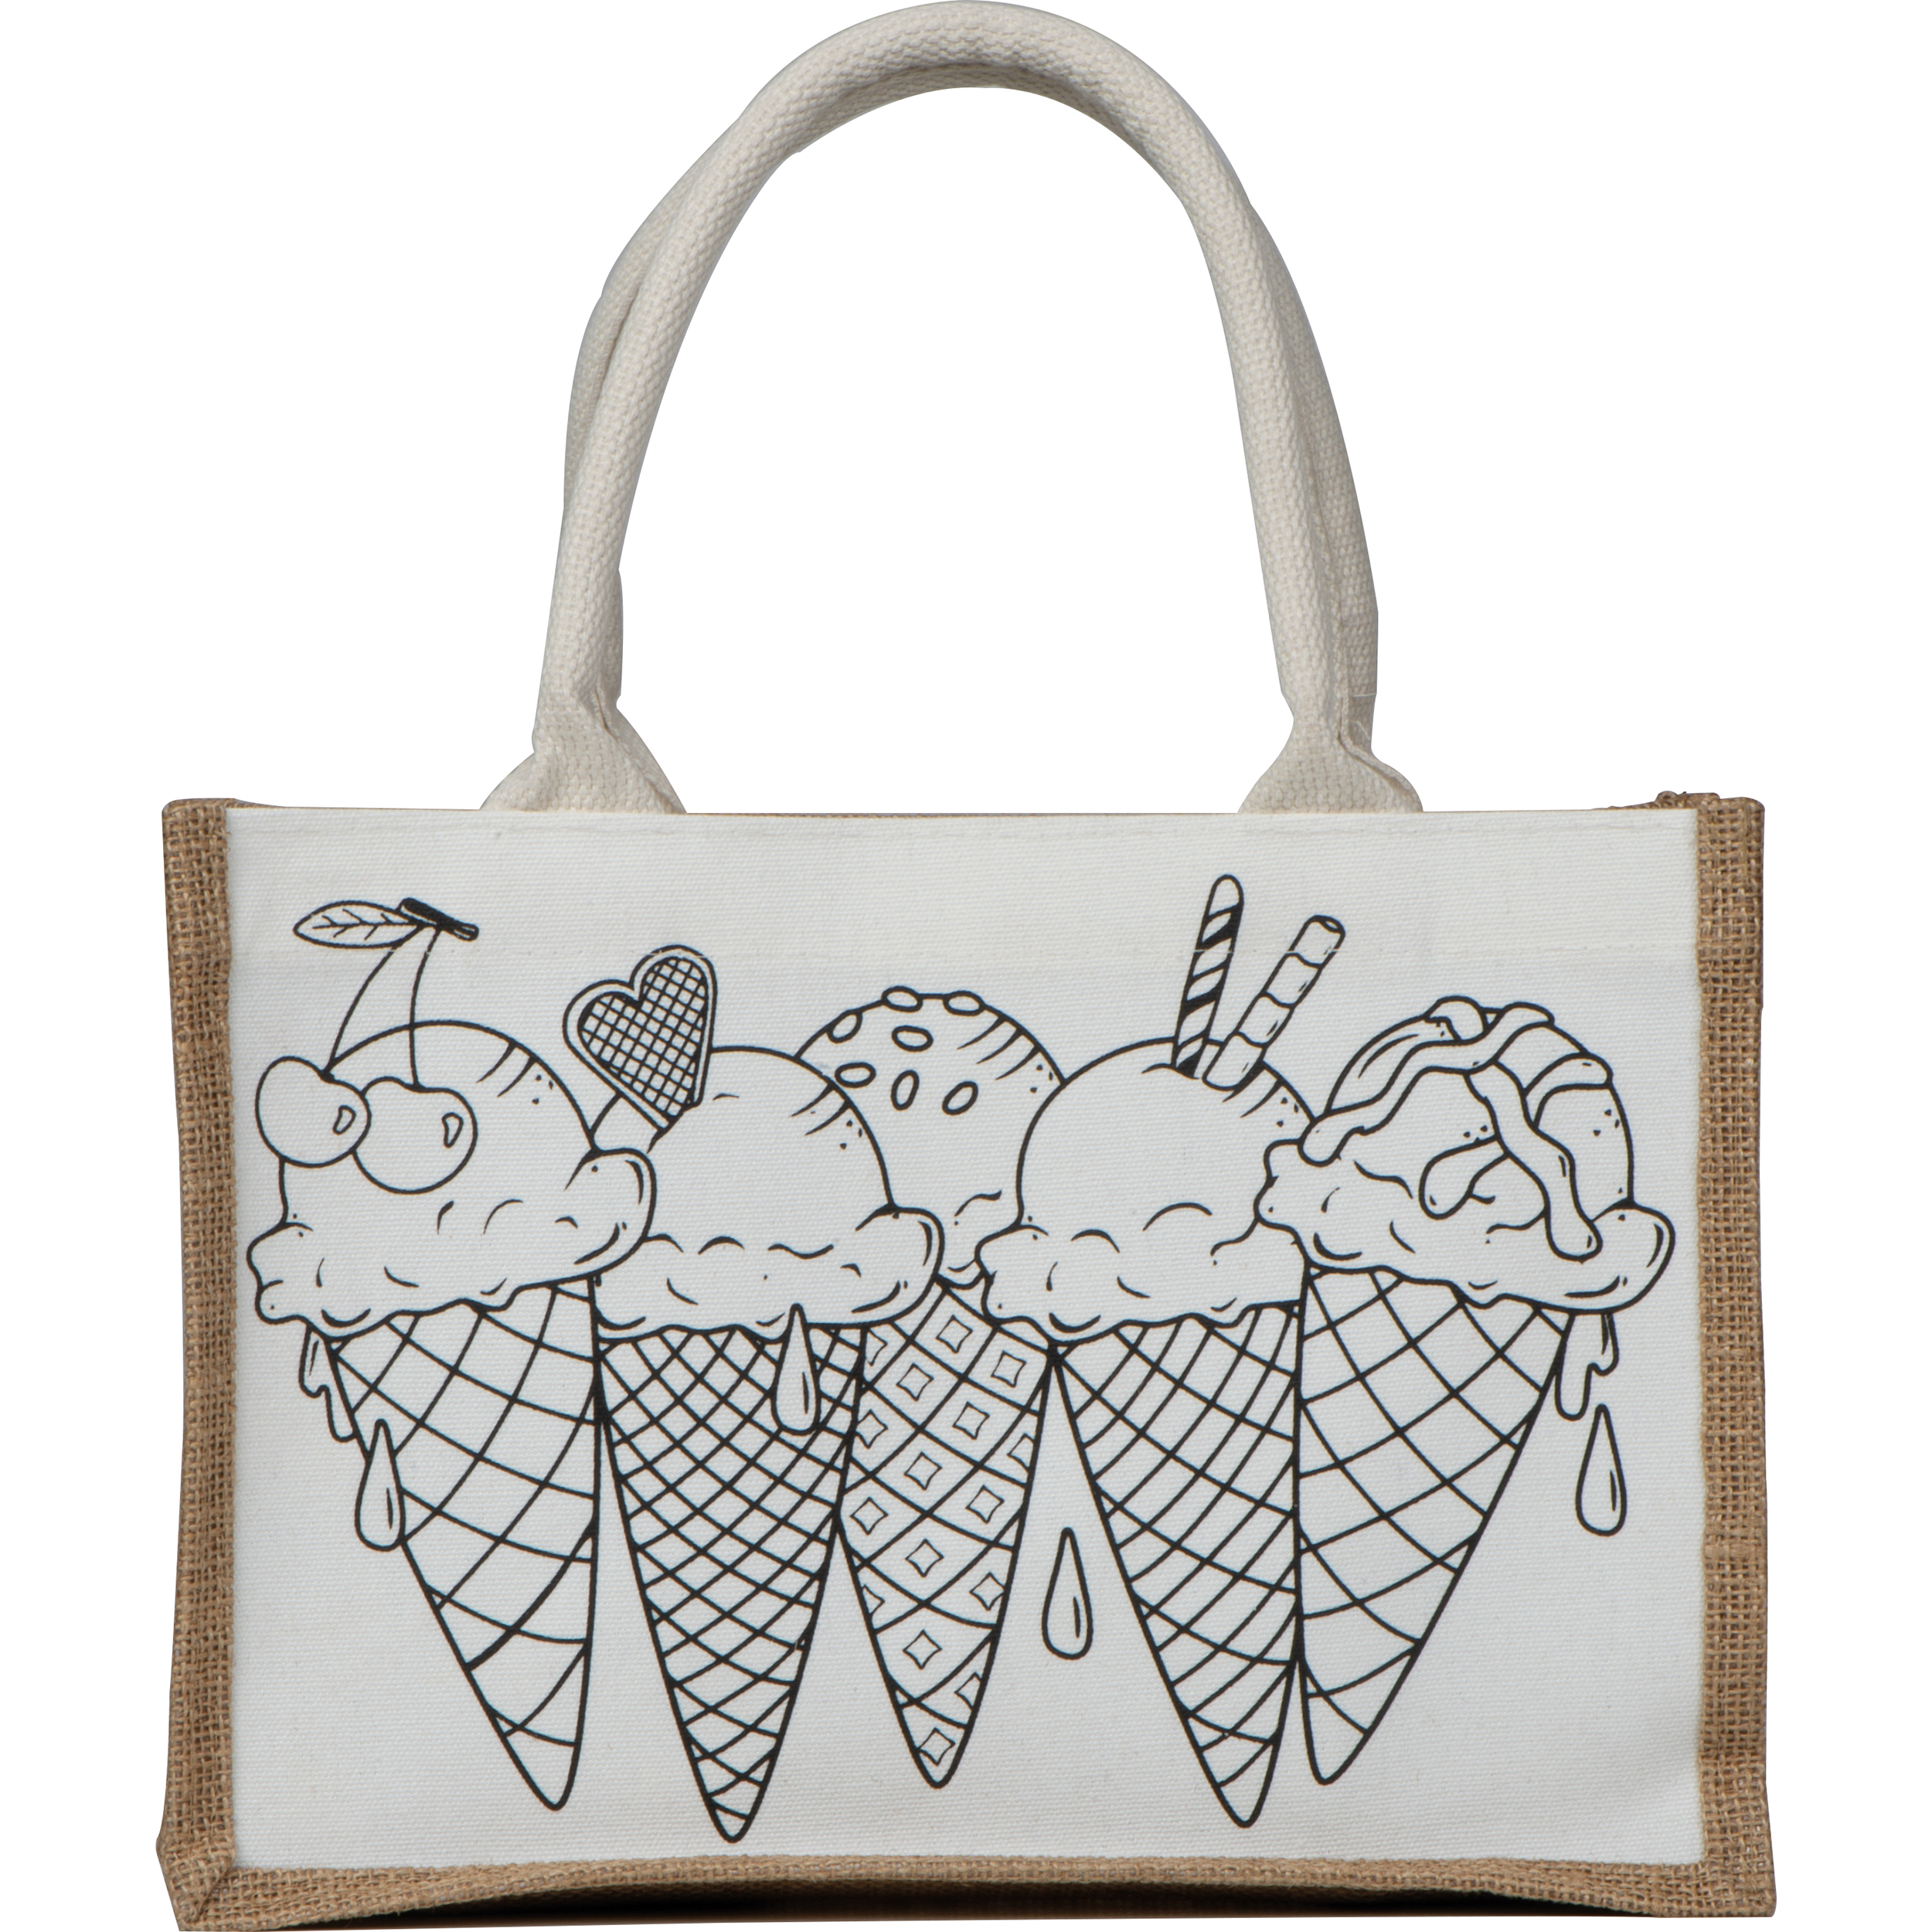 Jute cotton bag for colouring in